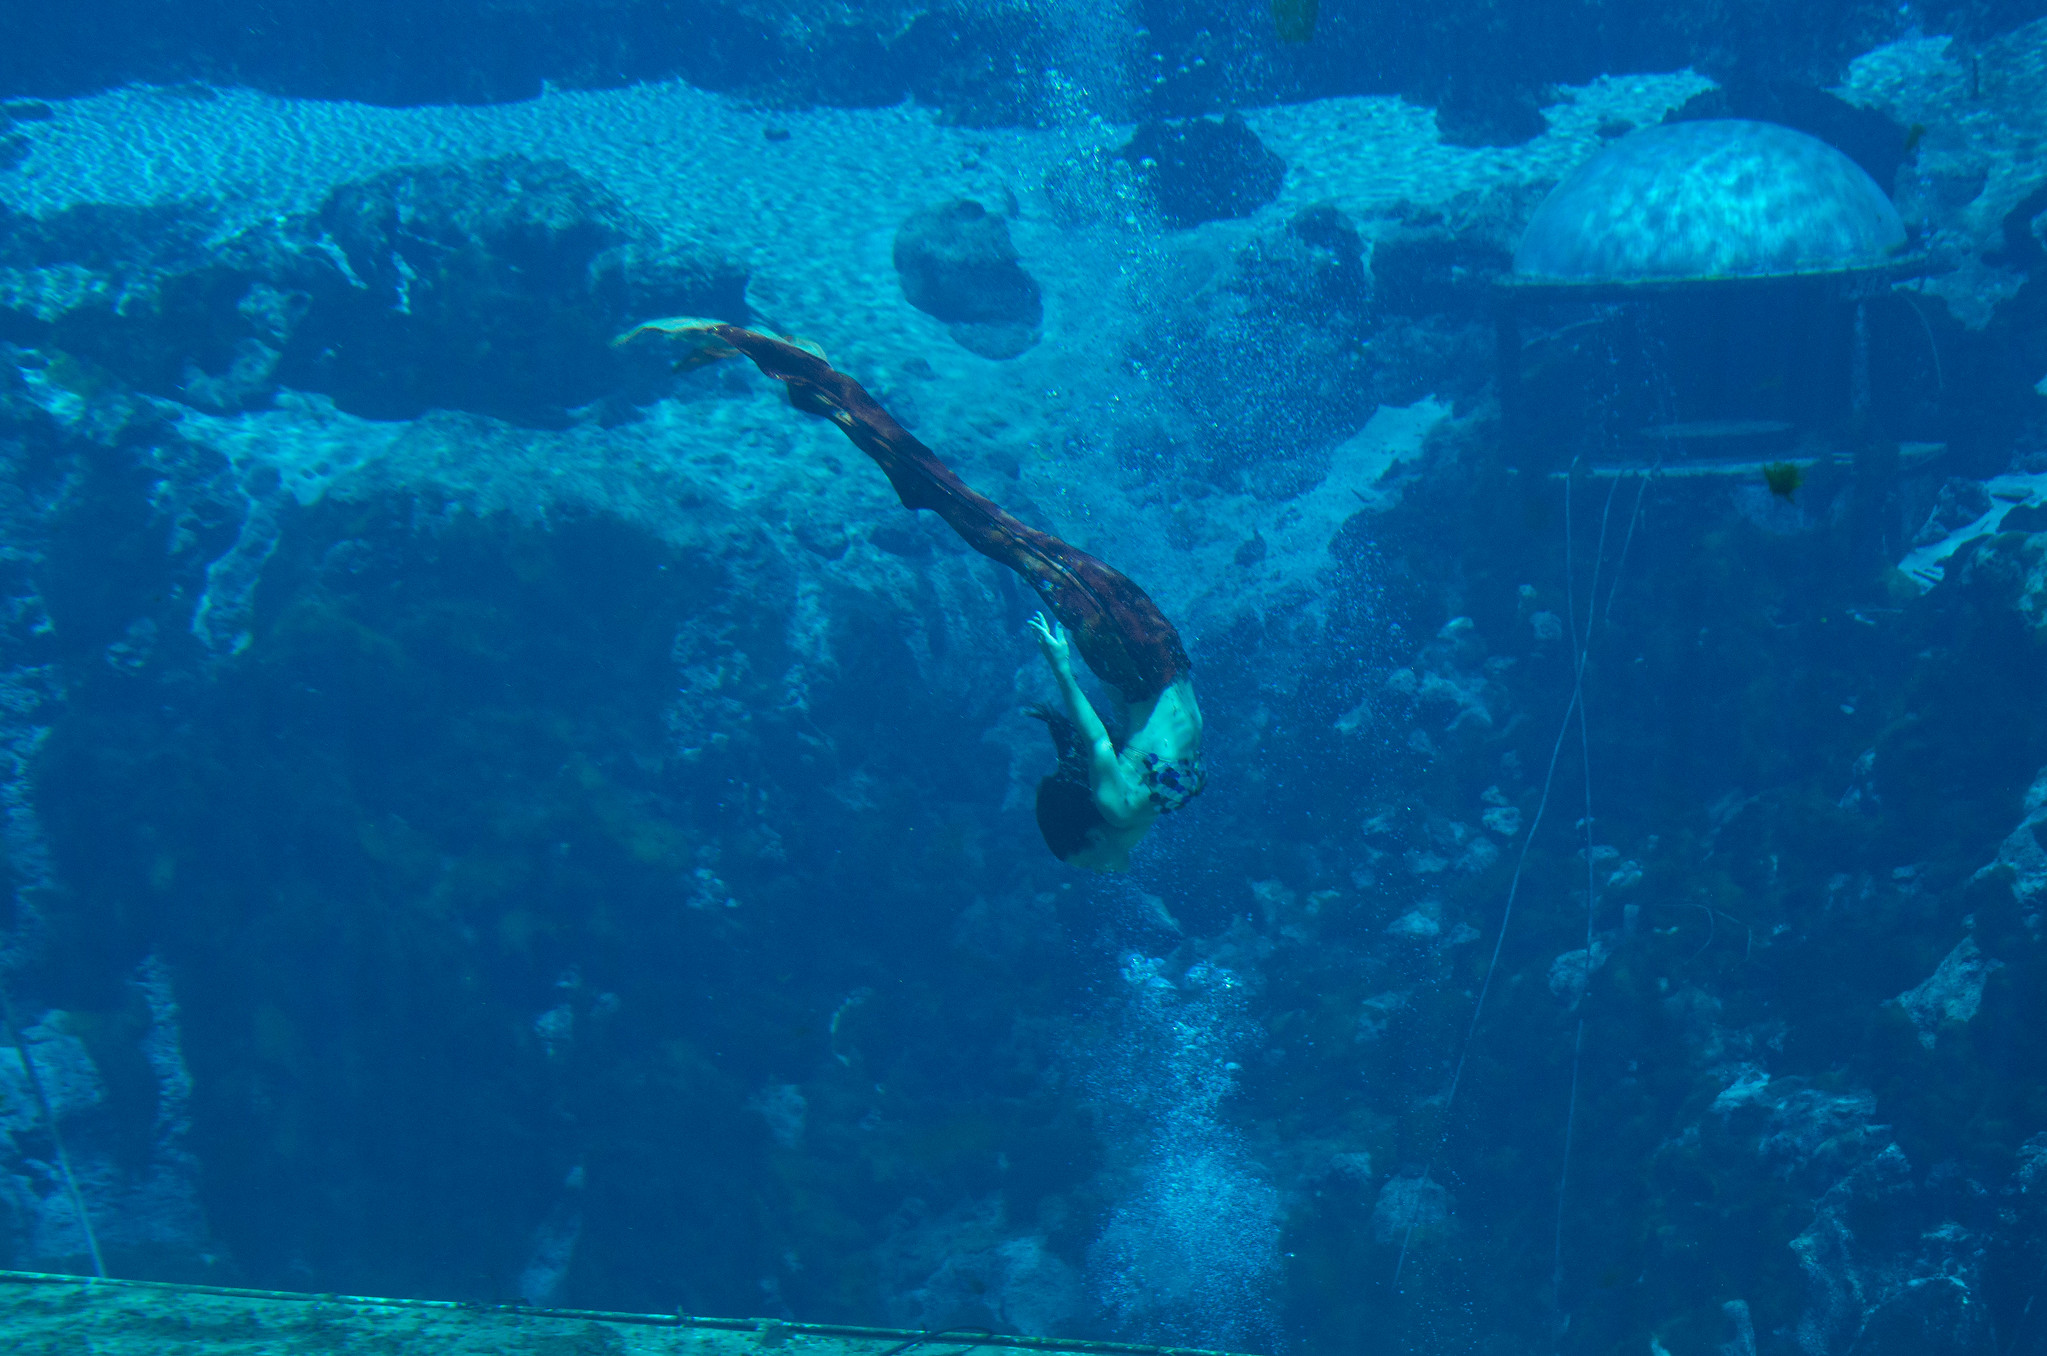 <p>Weeki Wachee’s mermaids have been putting on a show for more than 60 years. You can watch the performance in the underwater theater, which seats 400 visitors. </p>  <p>Though may seem a bit odd, the mermaid show is highly rated and well worth the visit.</p>